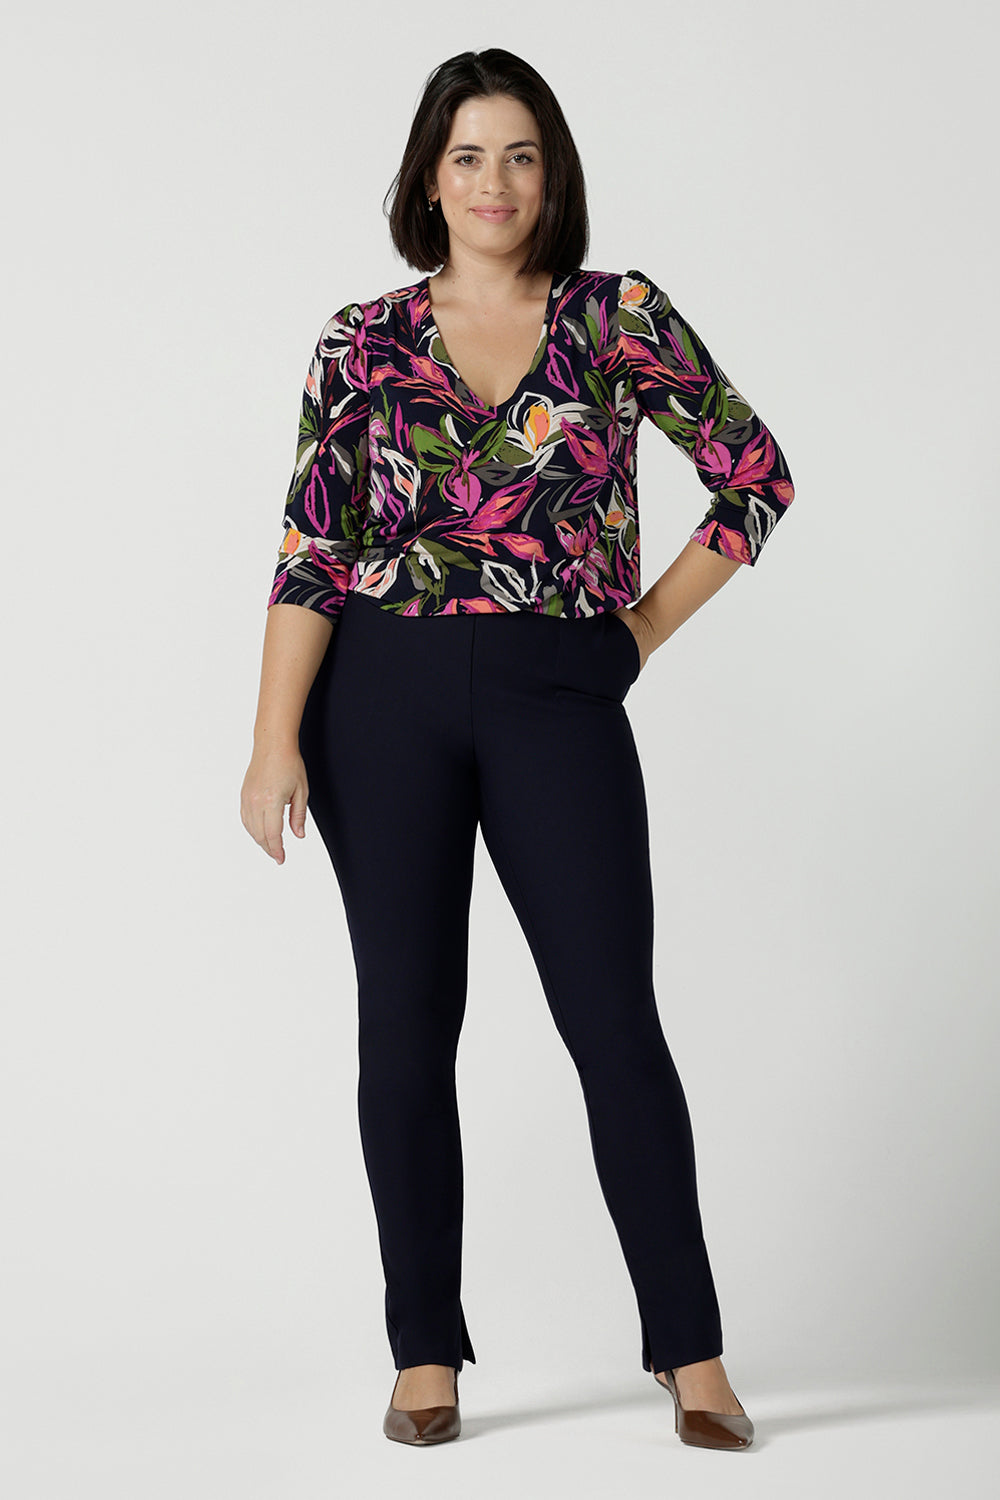 A size 10 woman wears the Vida top in Vivid Flora. A v-neckline style with 3/4 sleeves. Corporate casual work tops. Styled back with the Berit skirt in Charcoal. Made in Australia for women size 8 - 24.